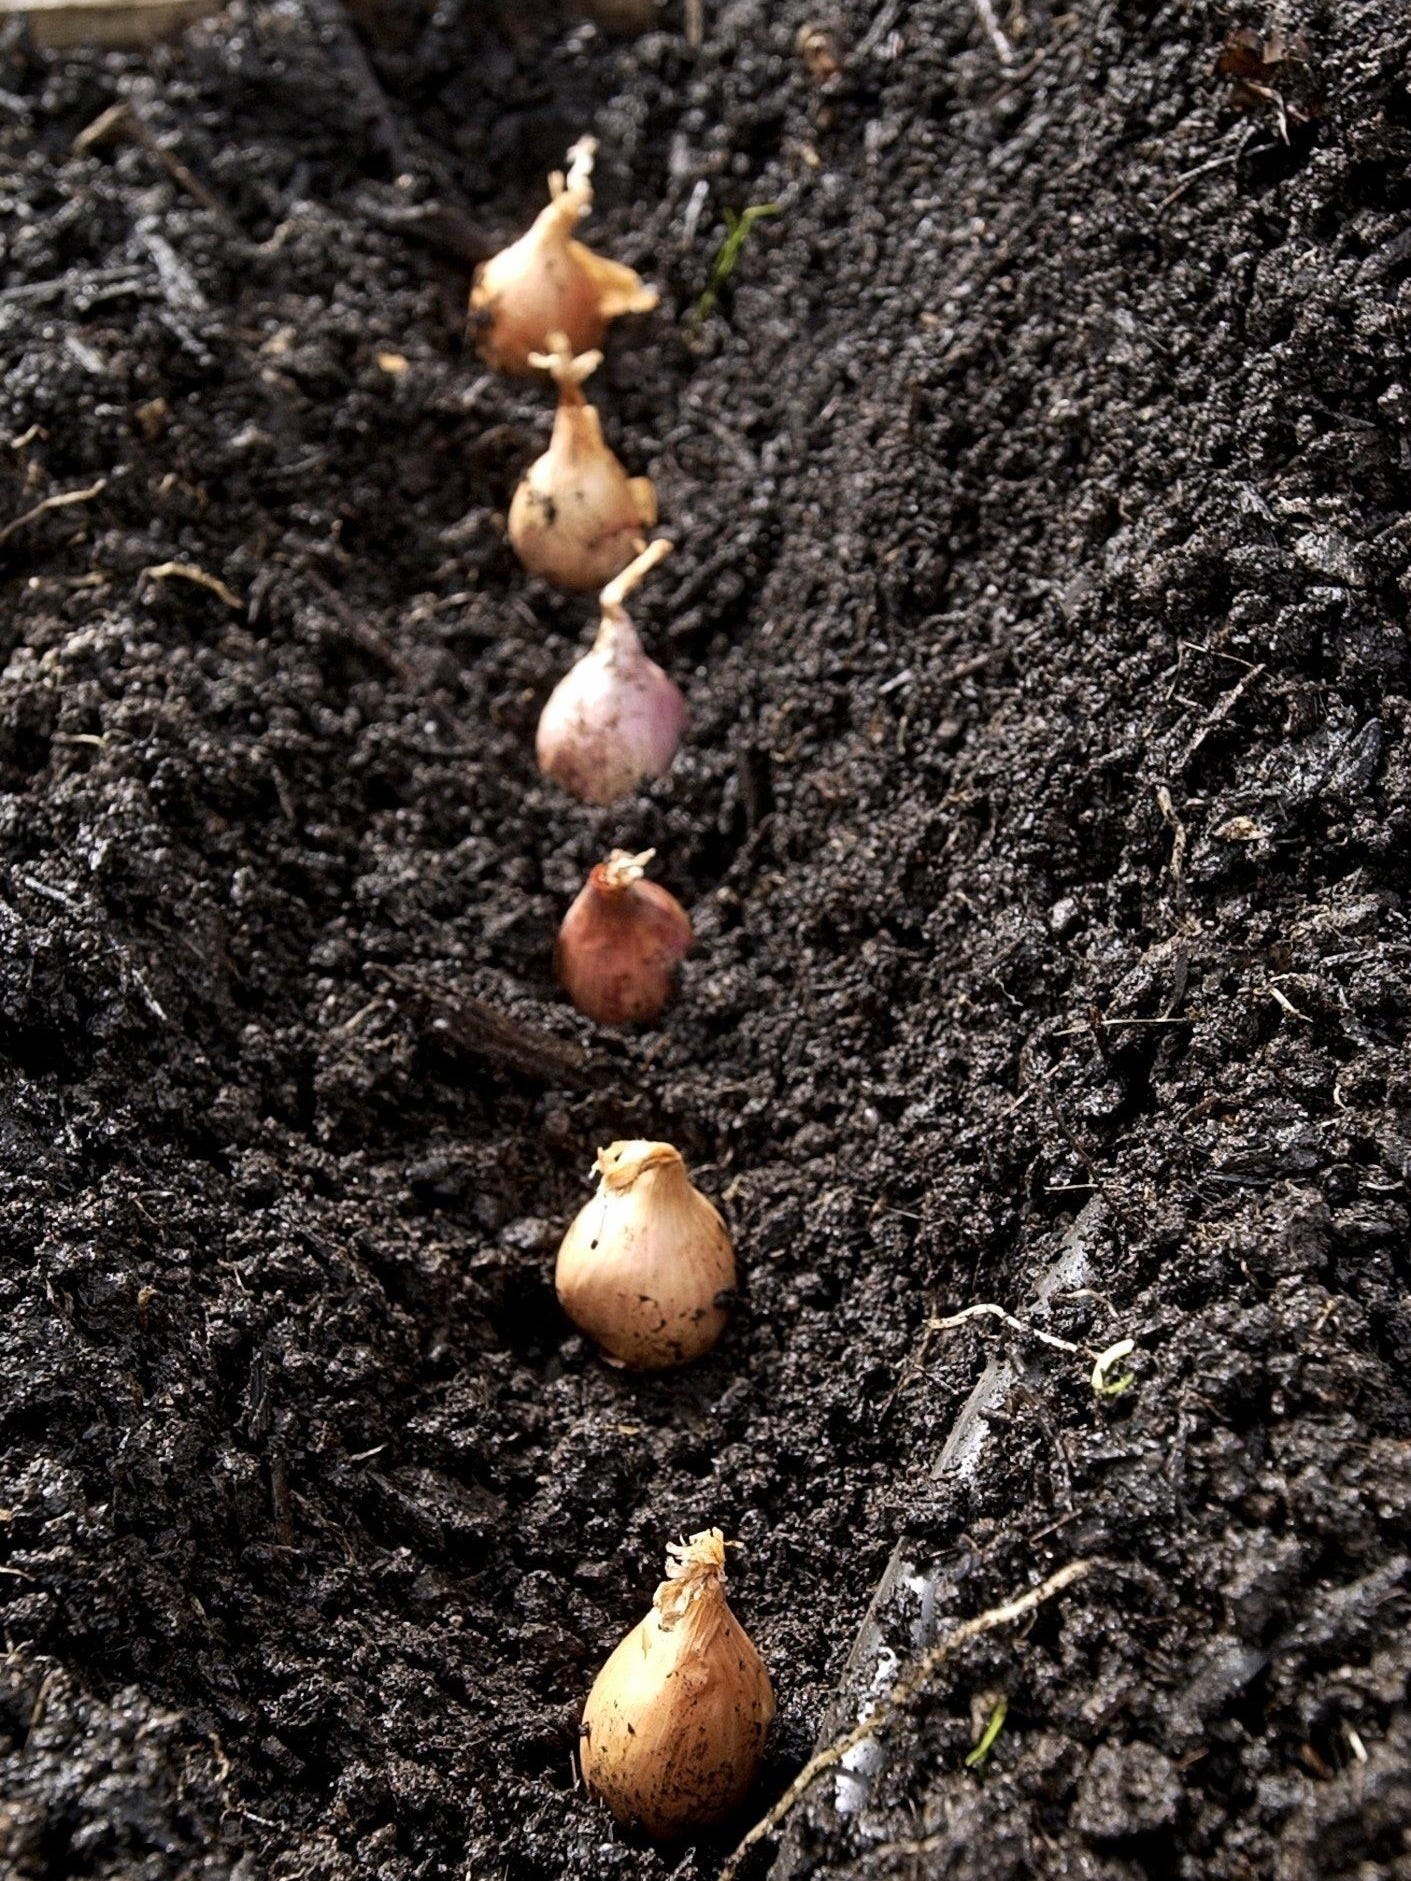 Plant shallots in fall or spring by seed or start